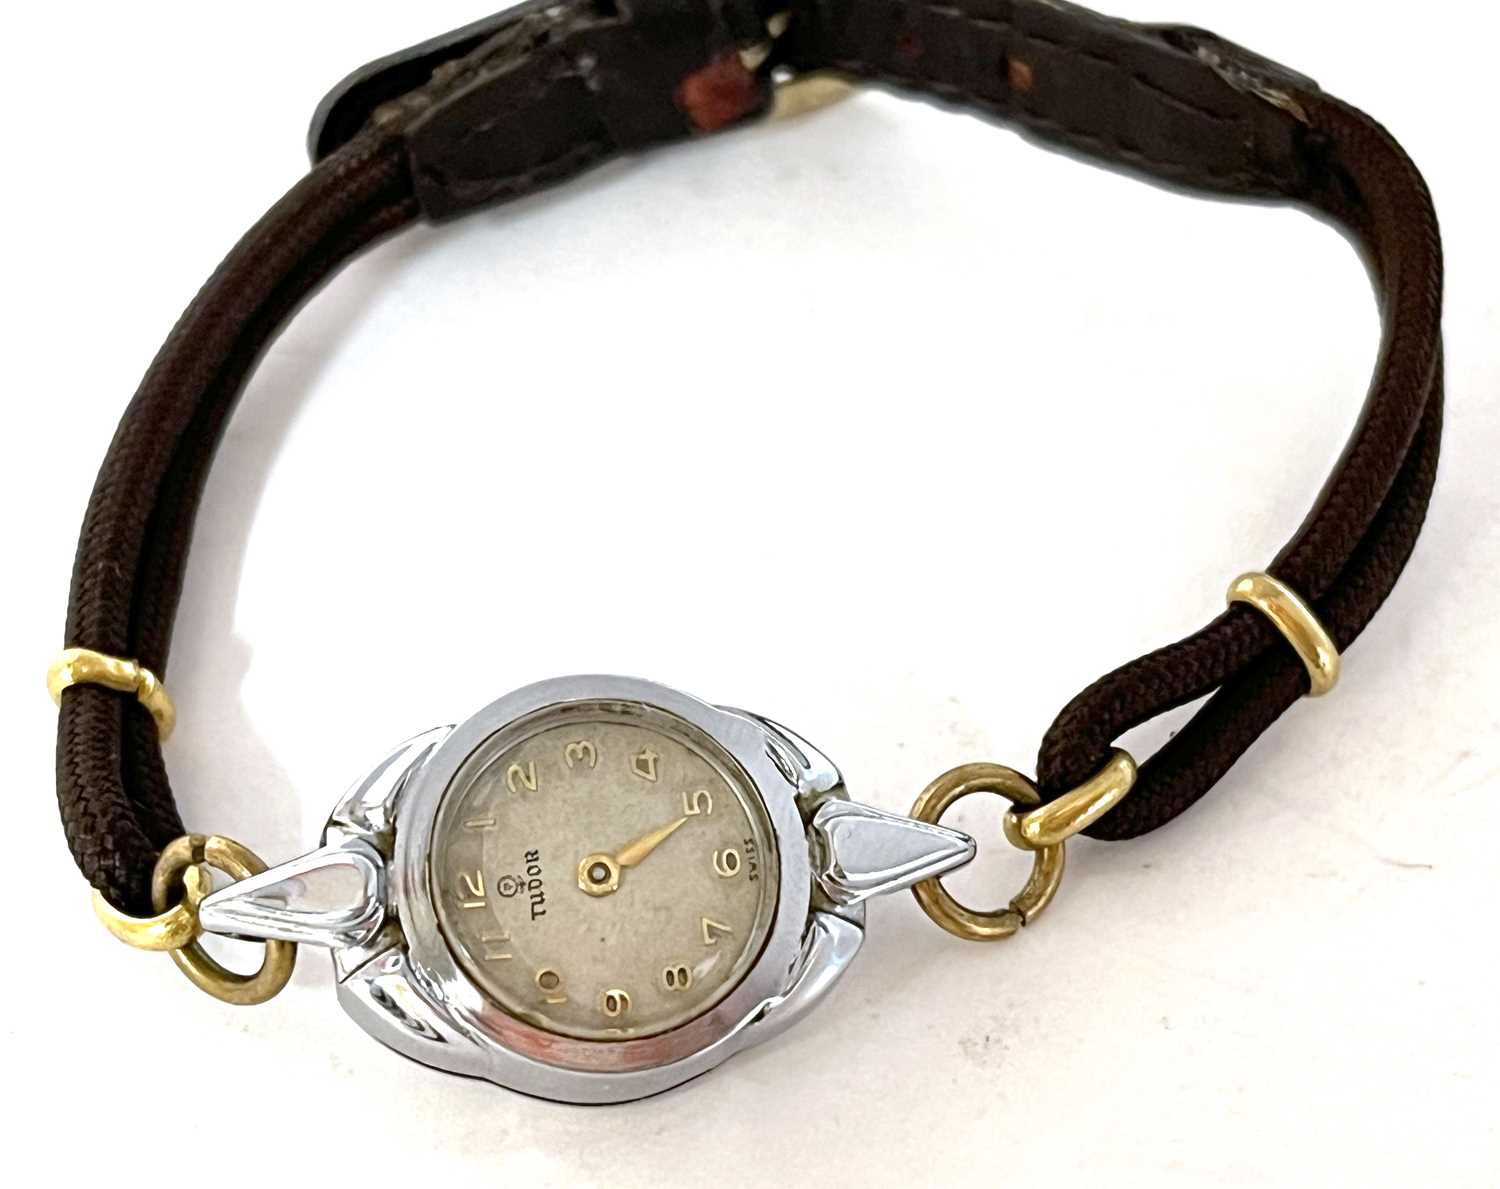 A ladies Tudor wristwatch, the watch has a cream dial along with gold coloured Arabic numeral hour